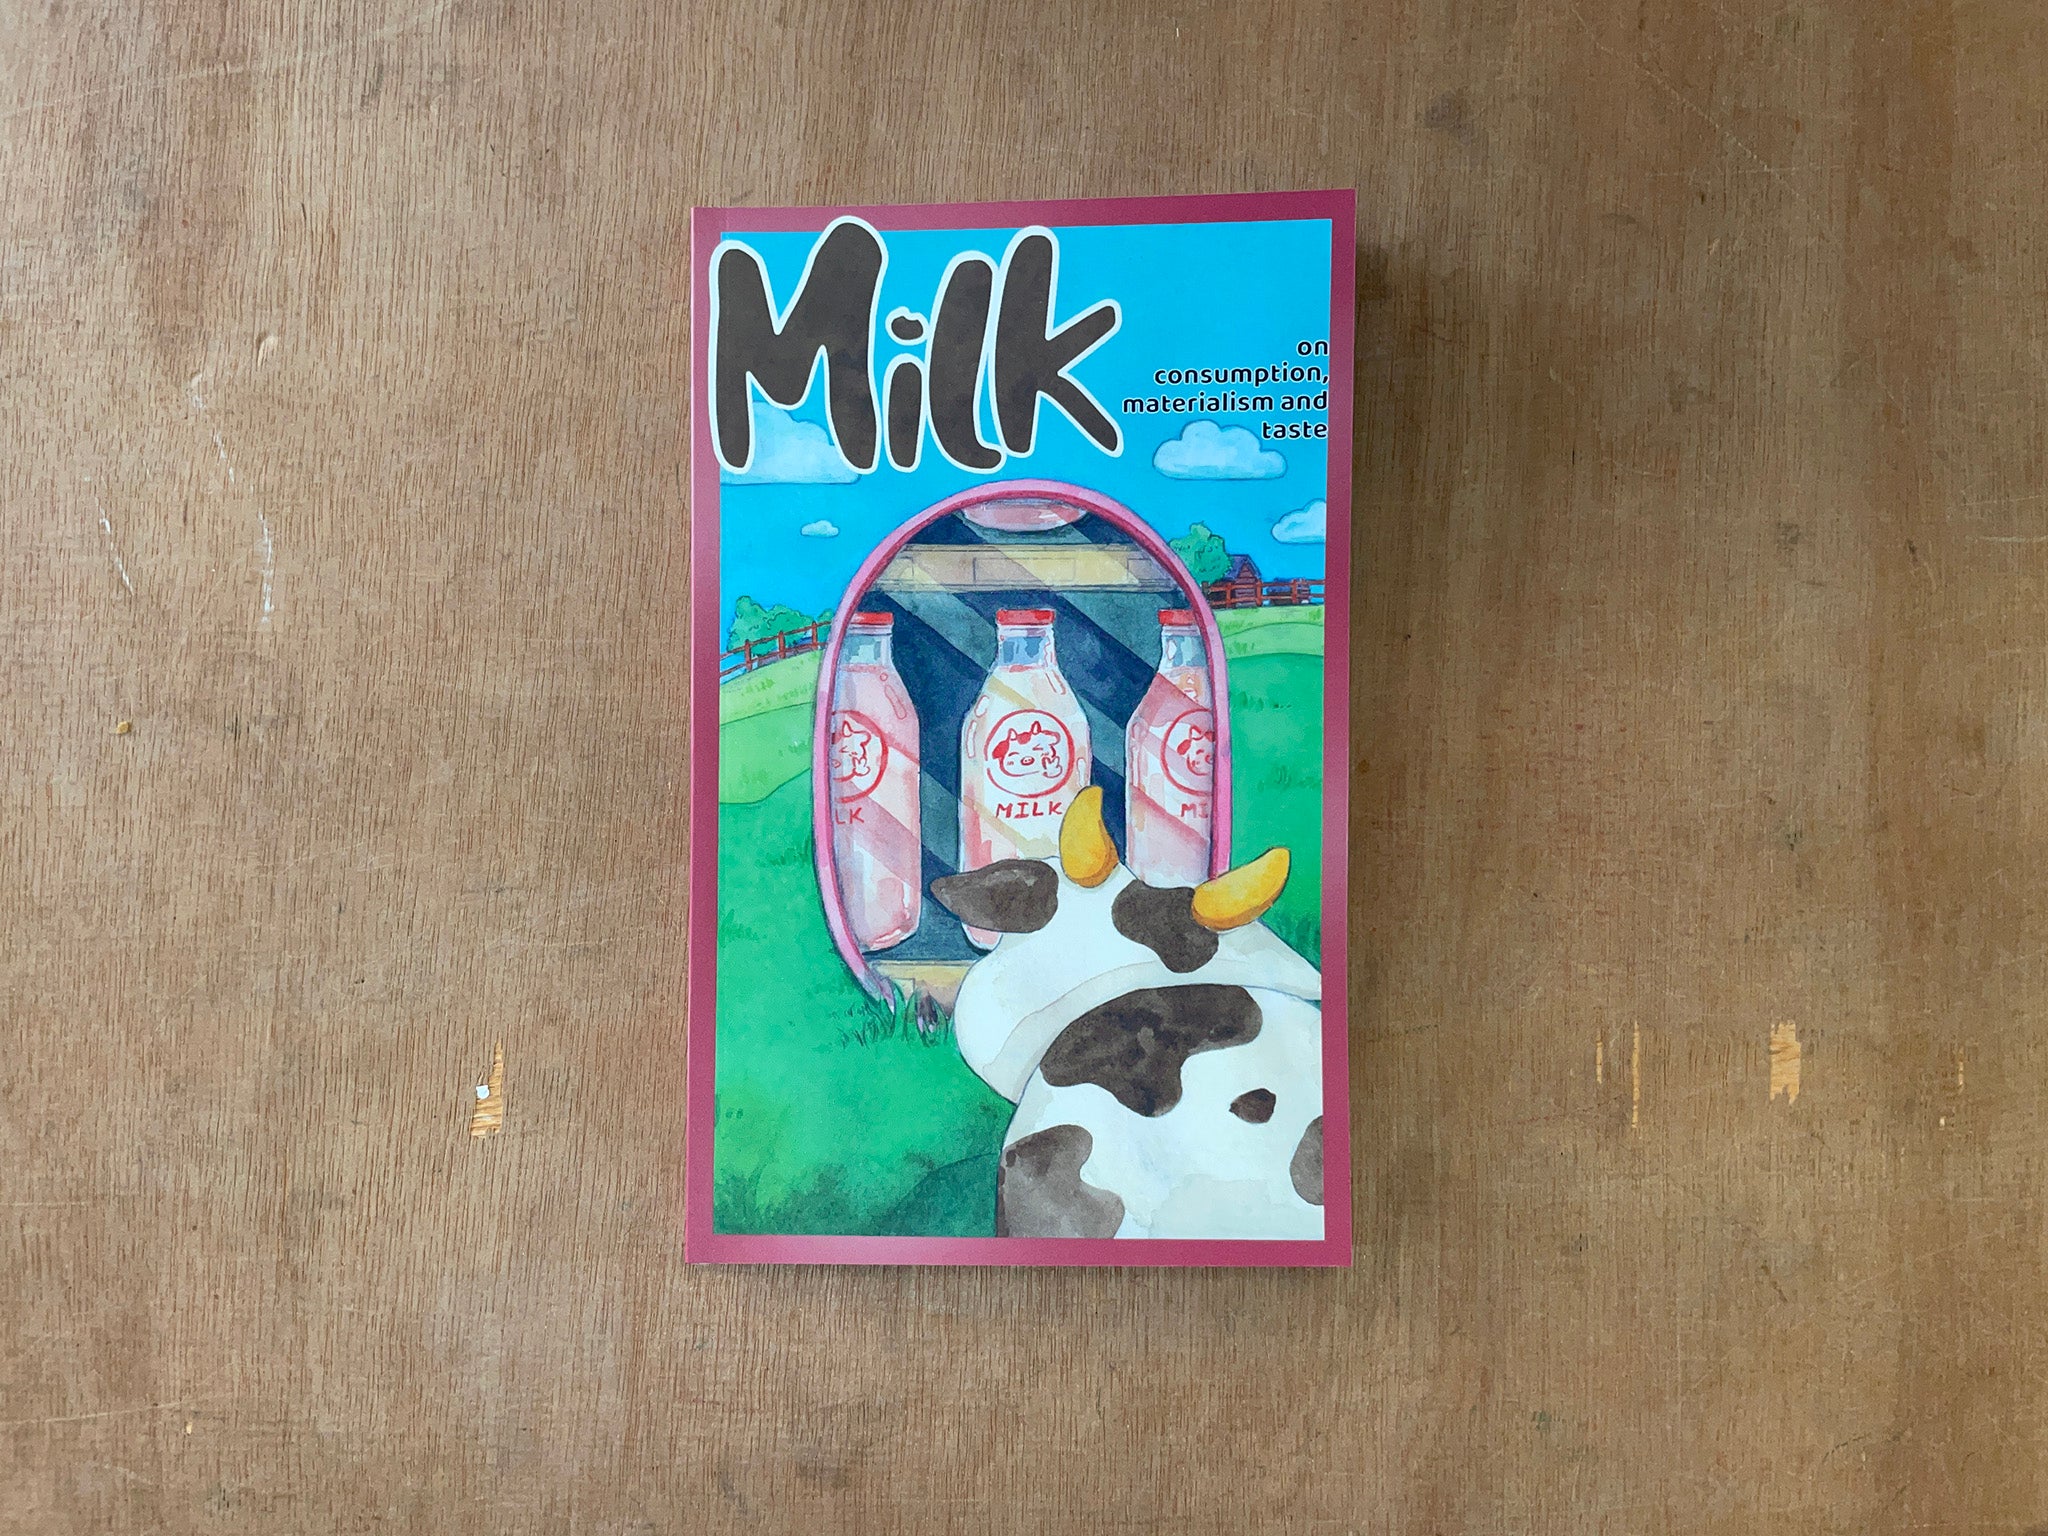 MILK : ON CONSUMPTION, MATERIALISM AND TASTE by Various Authors